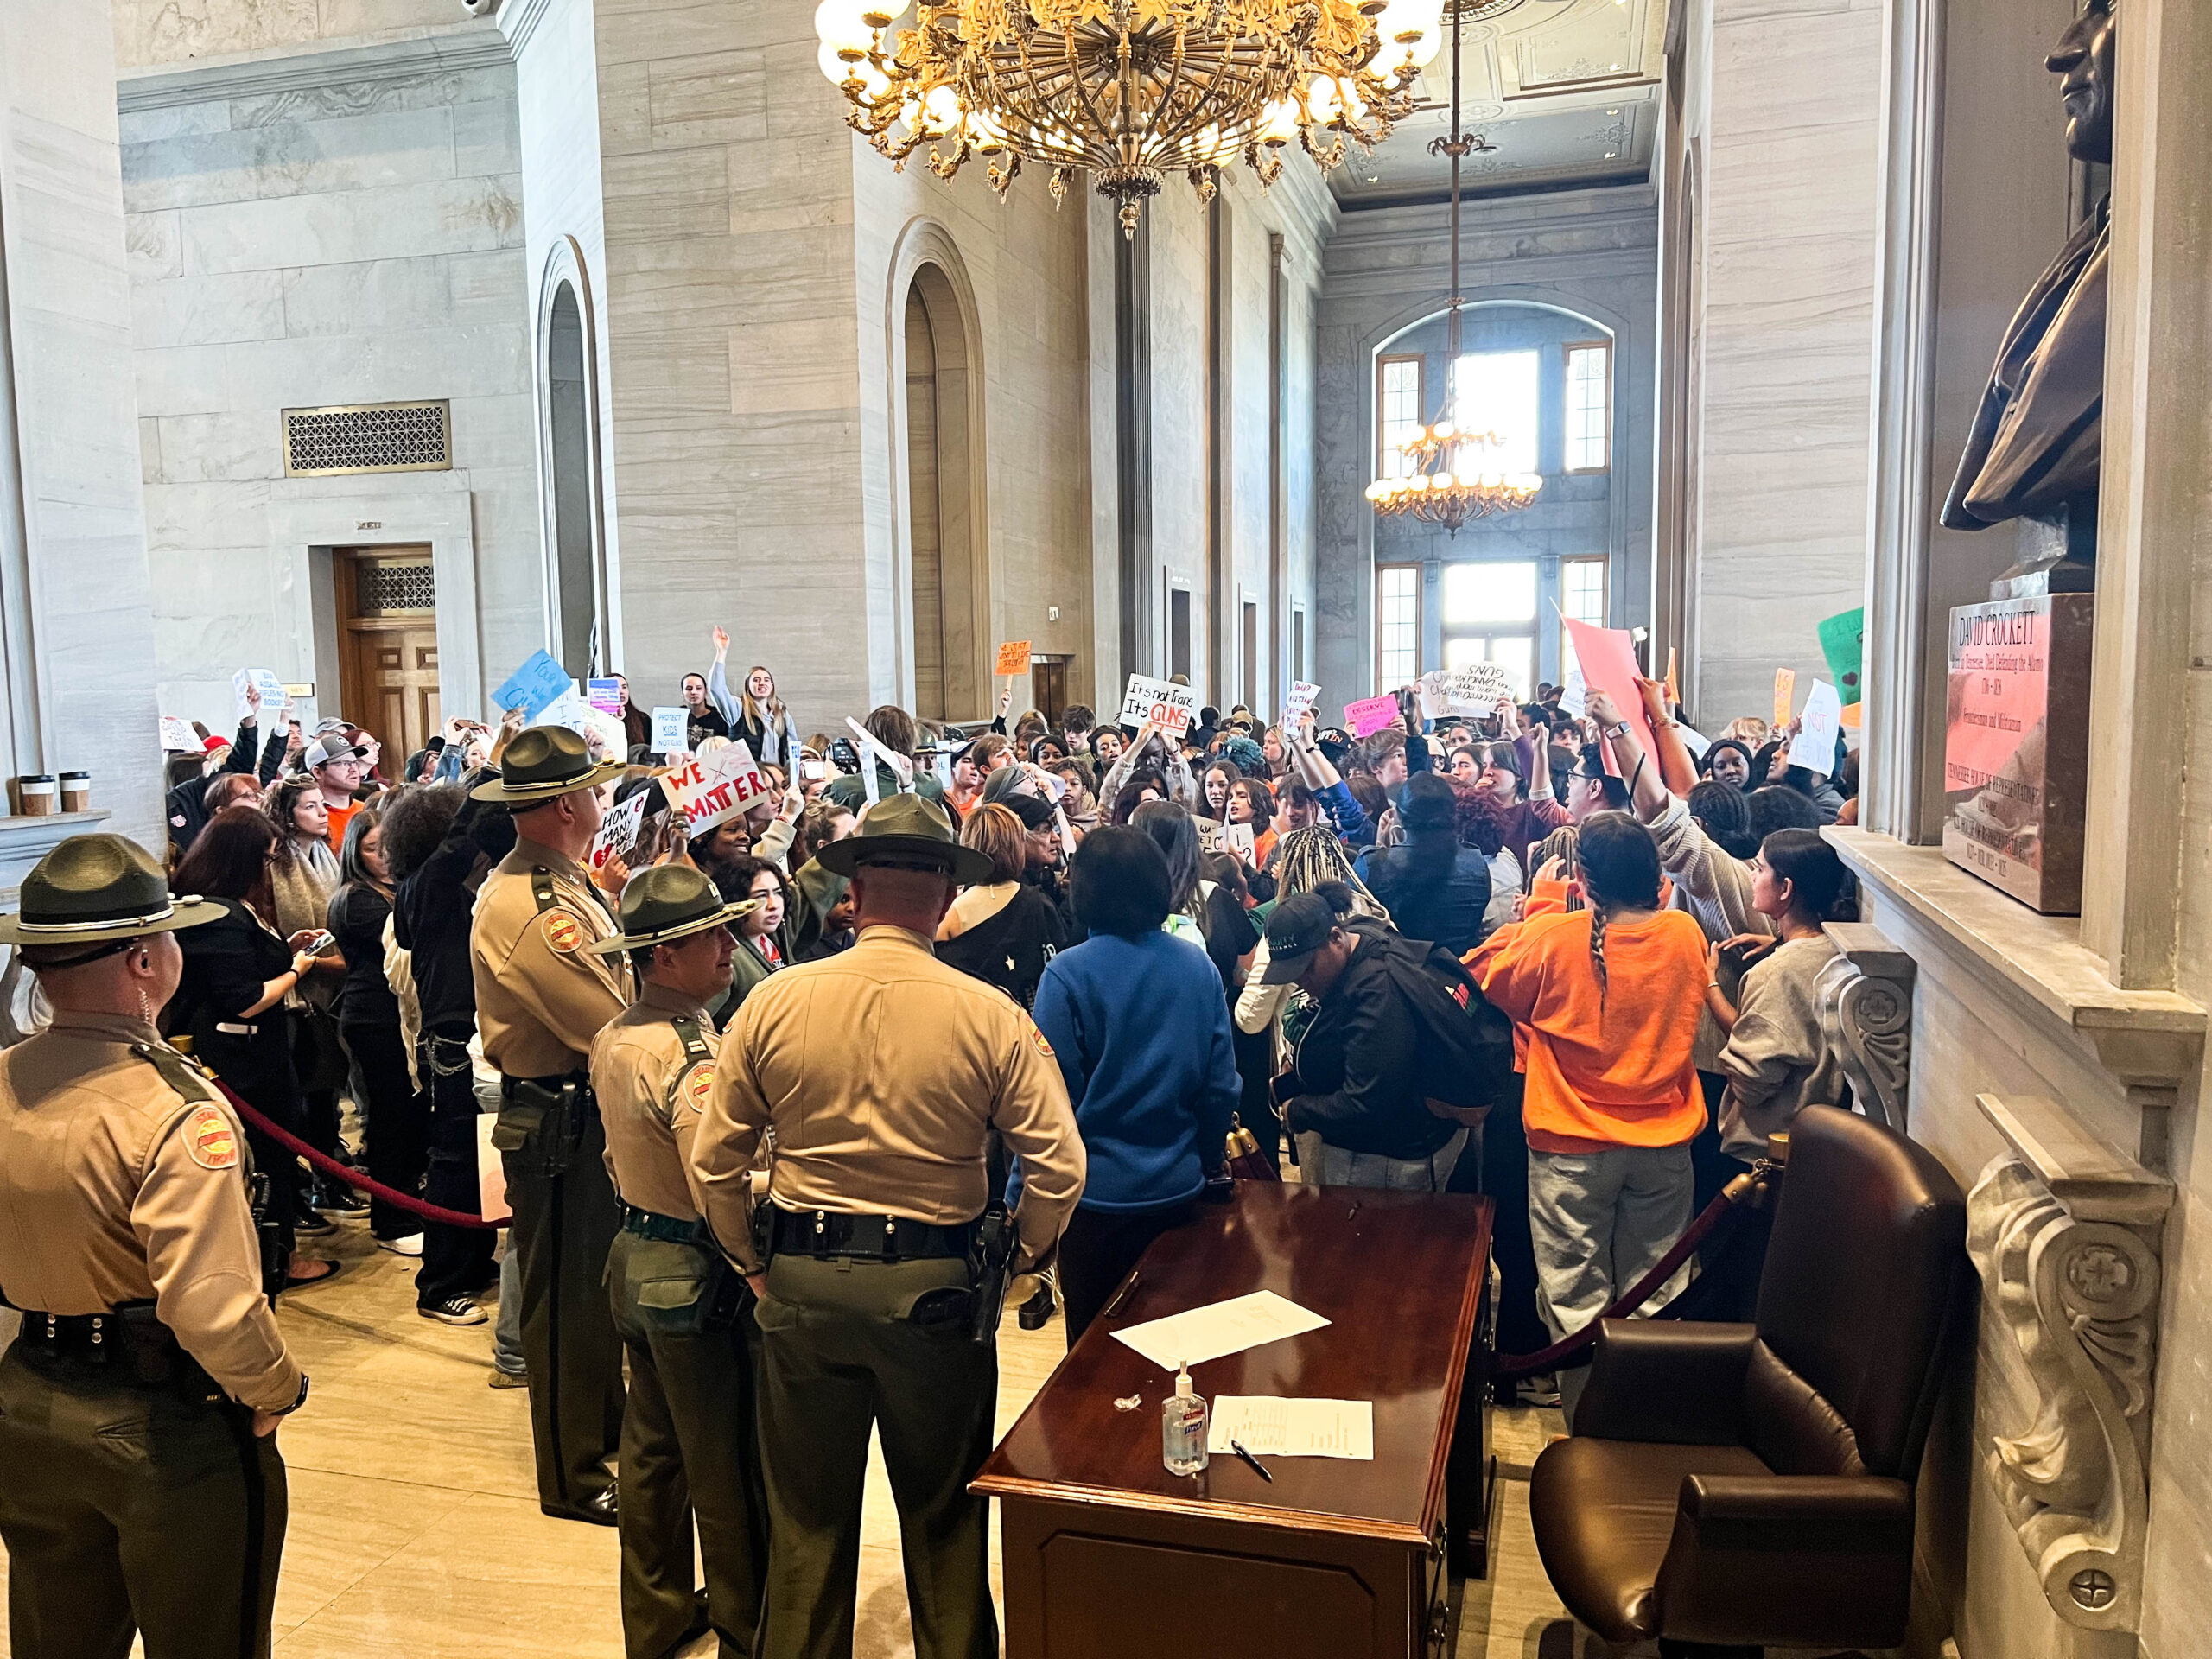 Tensions high at the Tennessee Capitol as hundreds protest for more gun